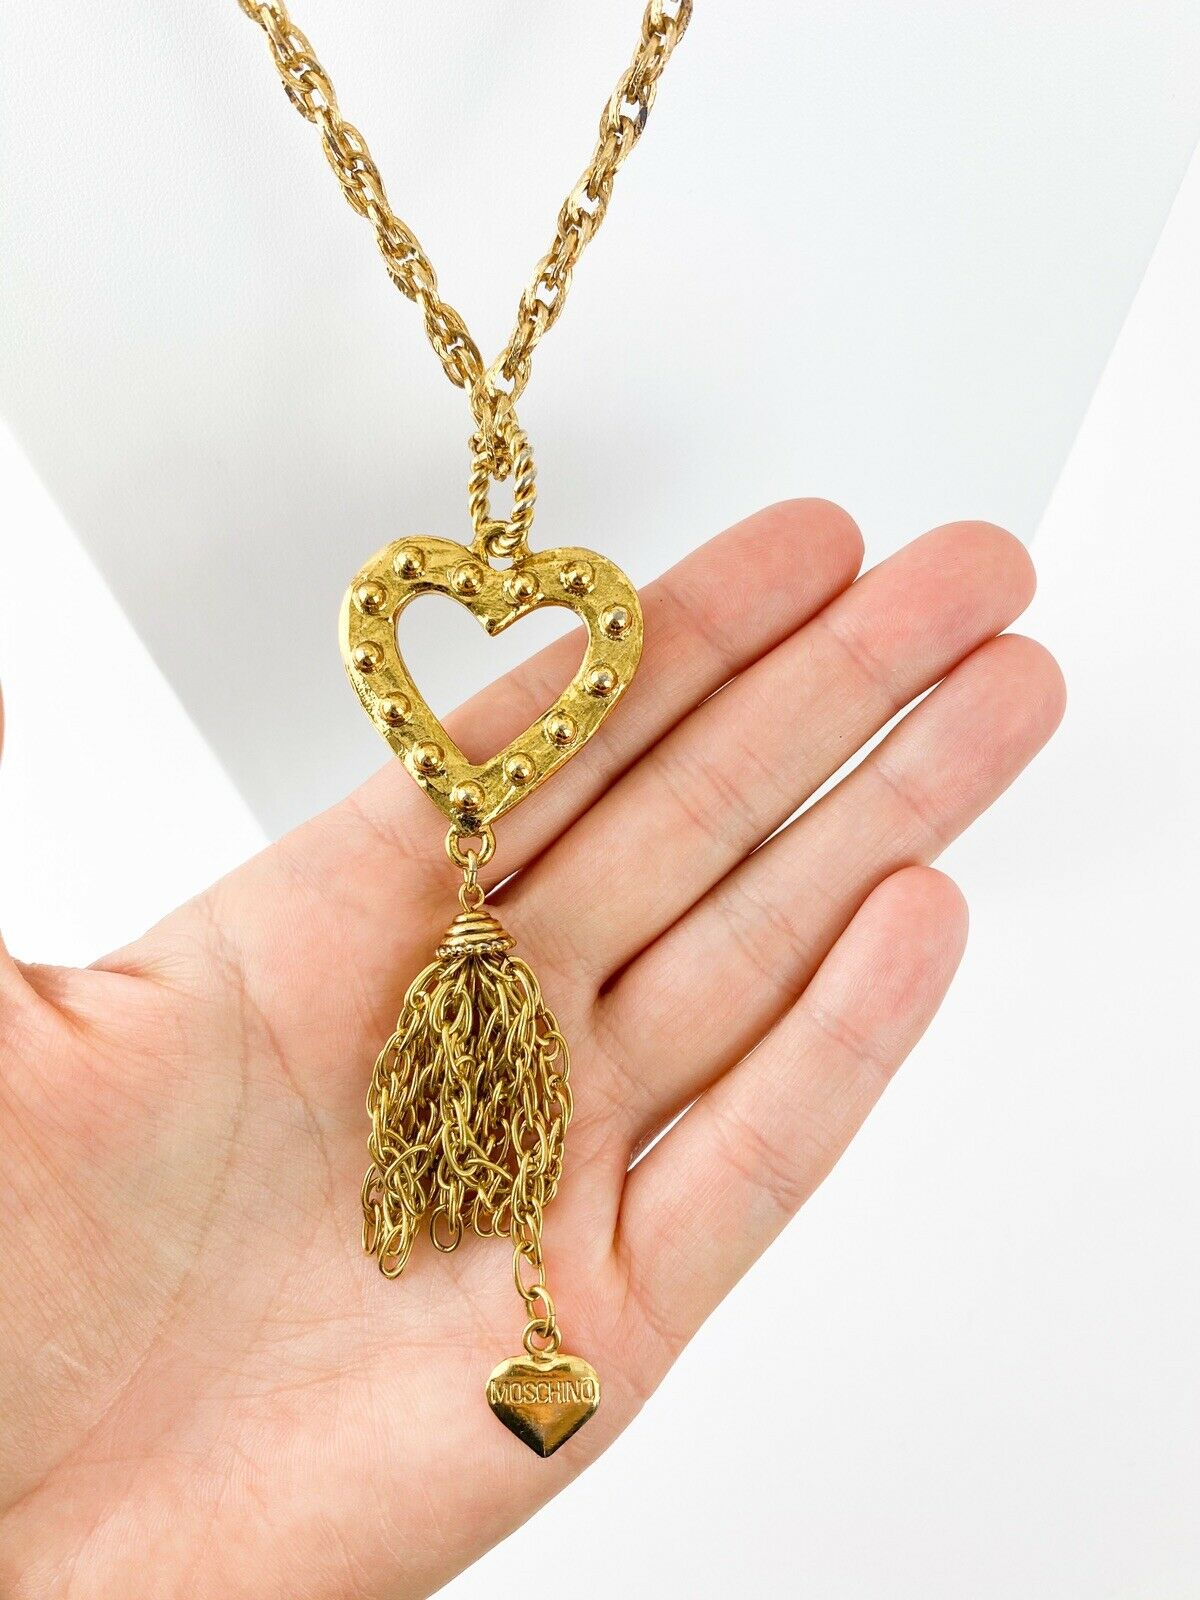 Moschino Vintage Gold Tone Openwork Heart Long Necklace Chain Fringe